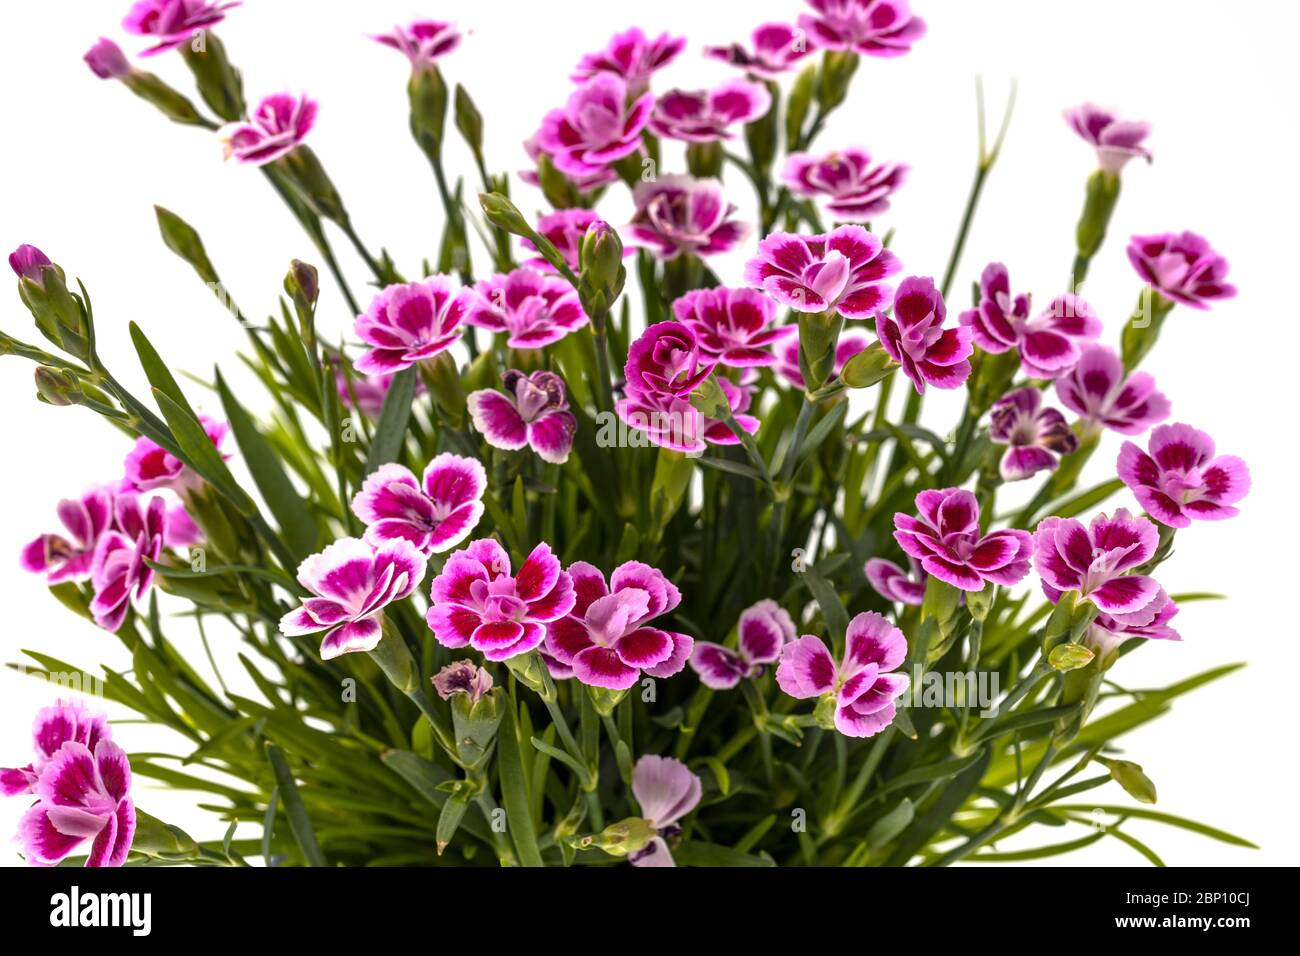 Gorgeous pink colorful dianthus close up view isolated on background. Beautiful backgrounds. Stock Photo